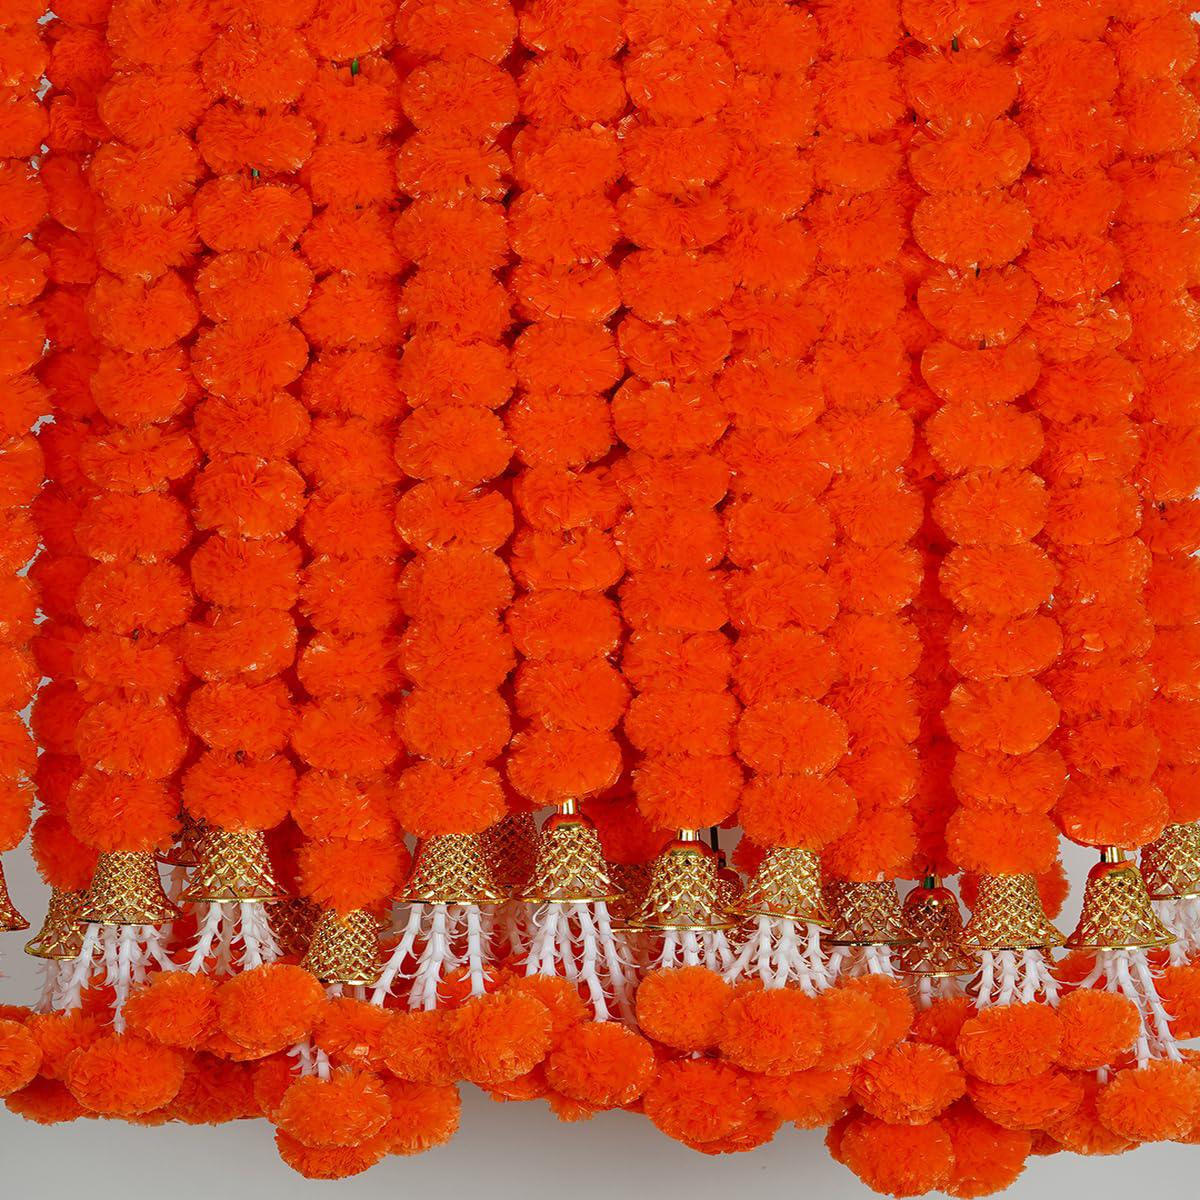 krati exports 5 pc 5 feet long marigold garland for decoration long strands artificial marigold flowers | indian dcor for poo